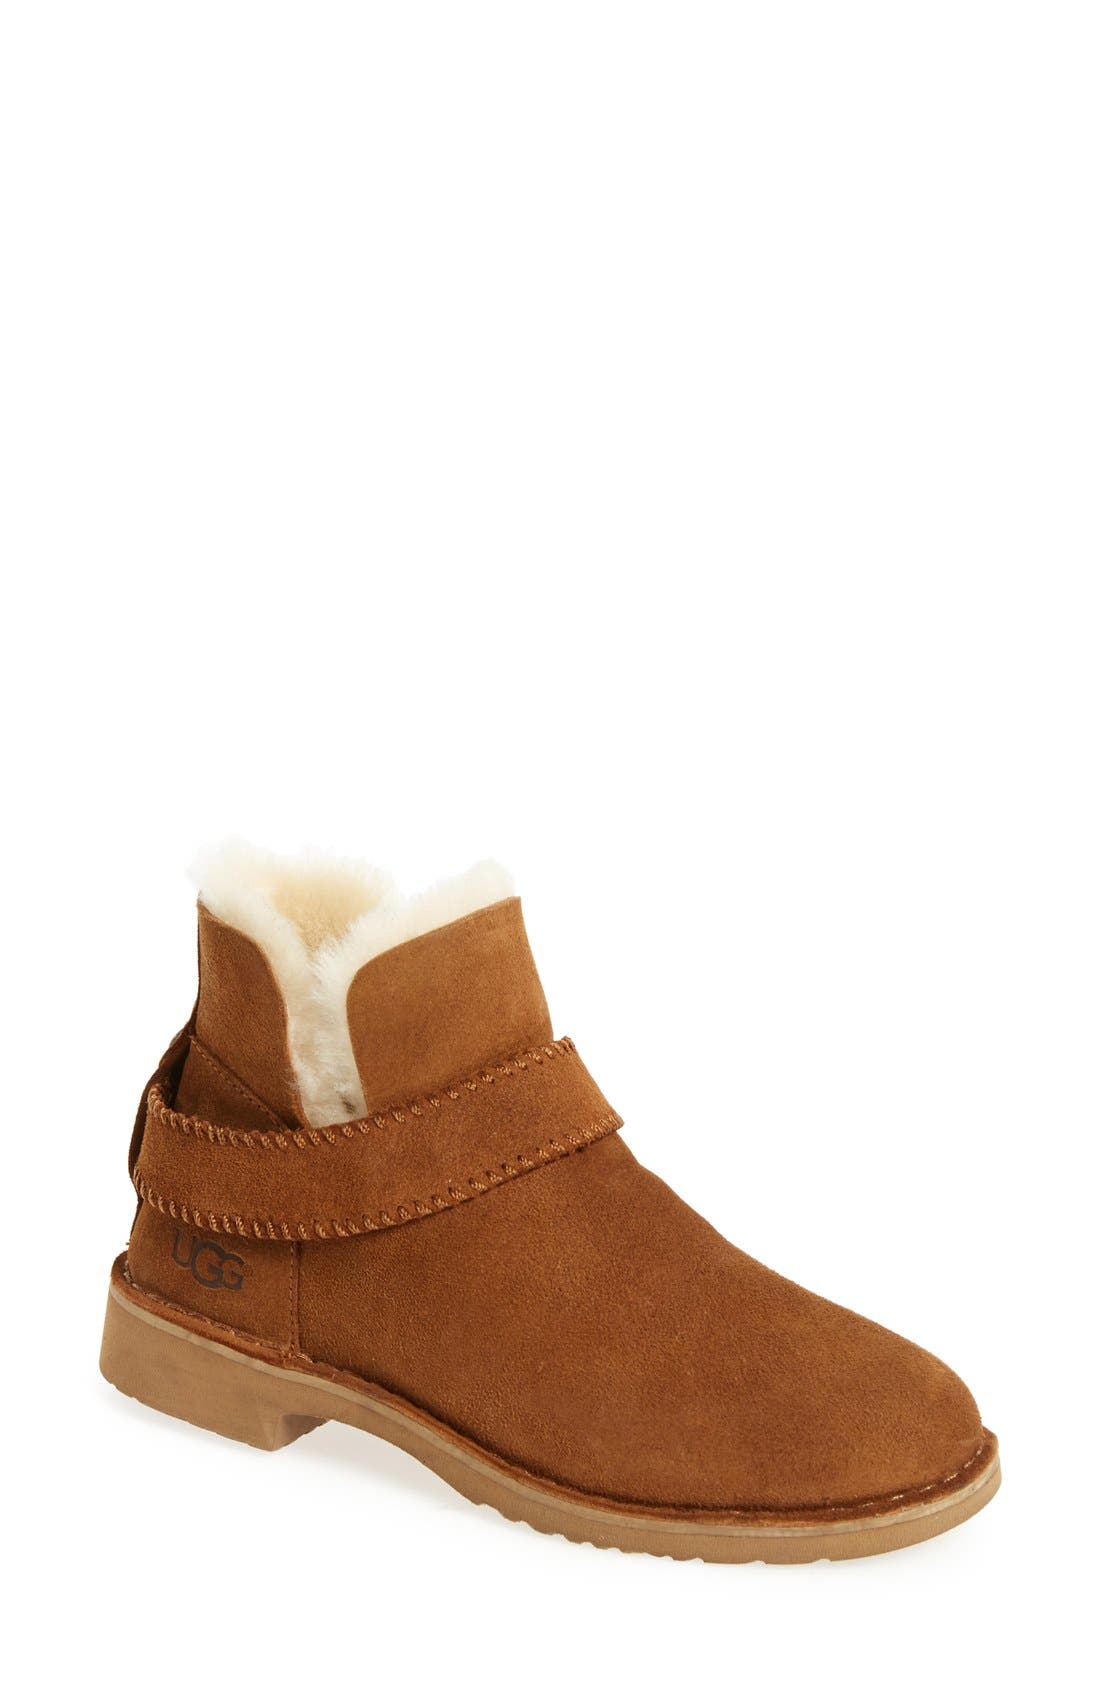 new ugg sneakers